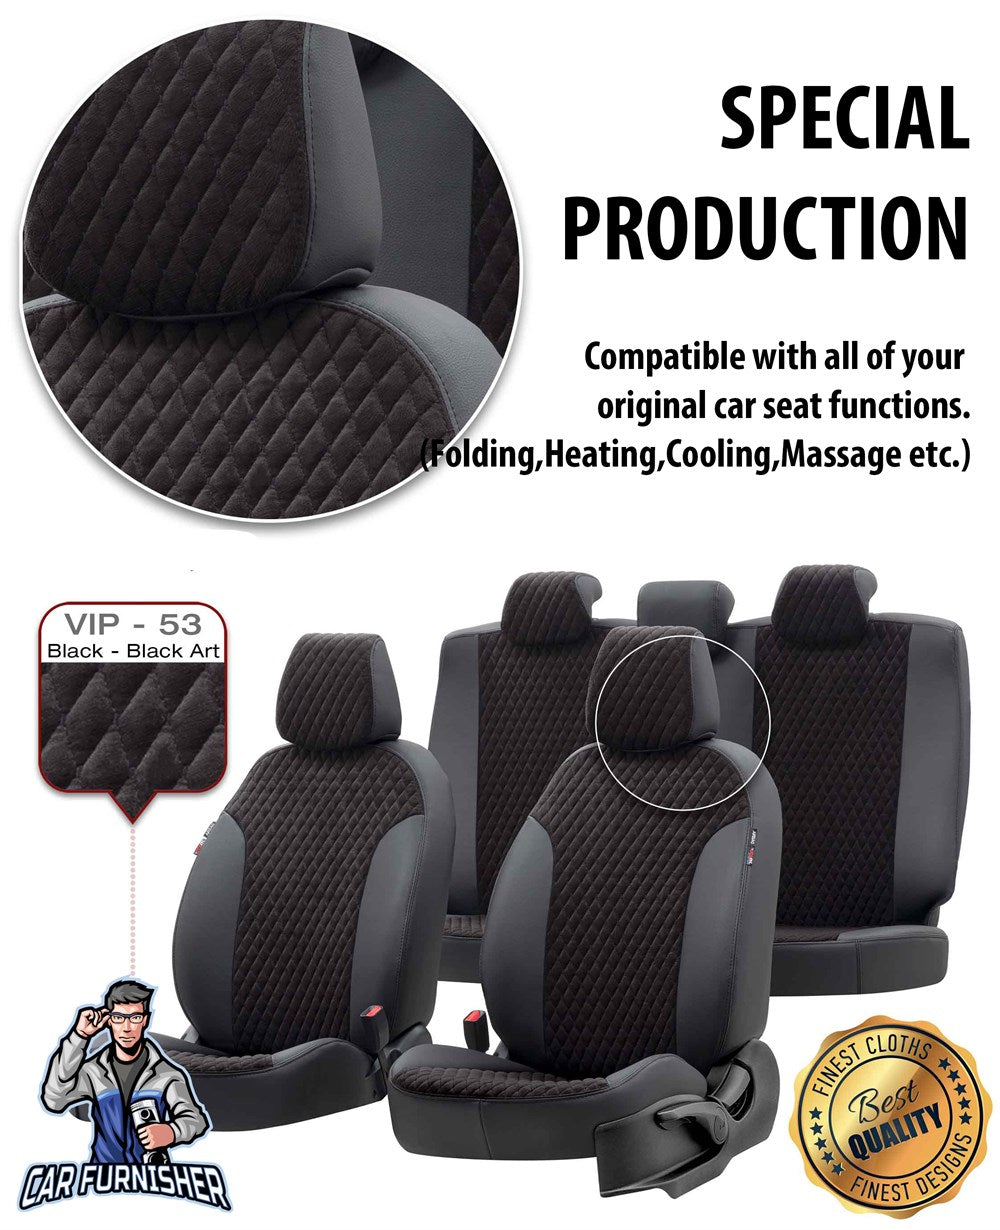 Daihatsu Terios Car Seat Covers 2007-2011 Amsterdam Foal Feather Black Full Set (5 Seats + Handrest) Leather & Foal Feather